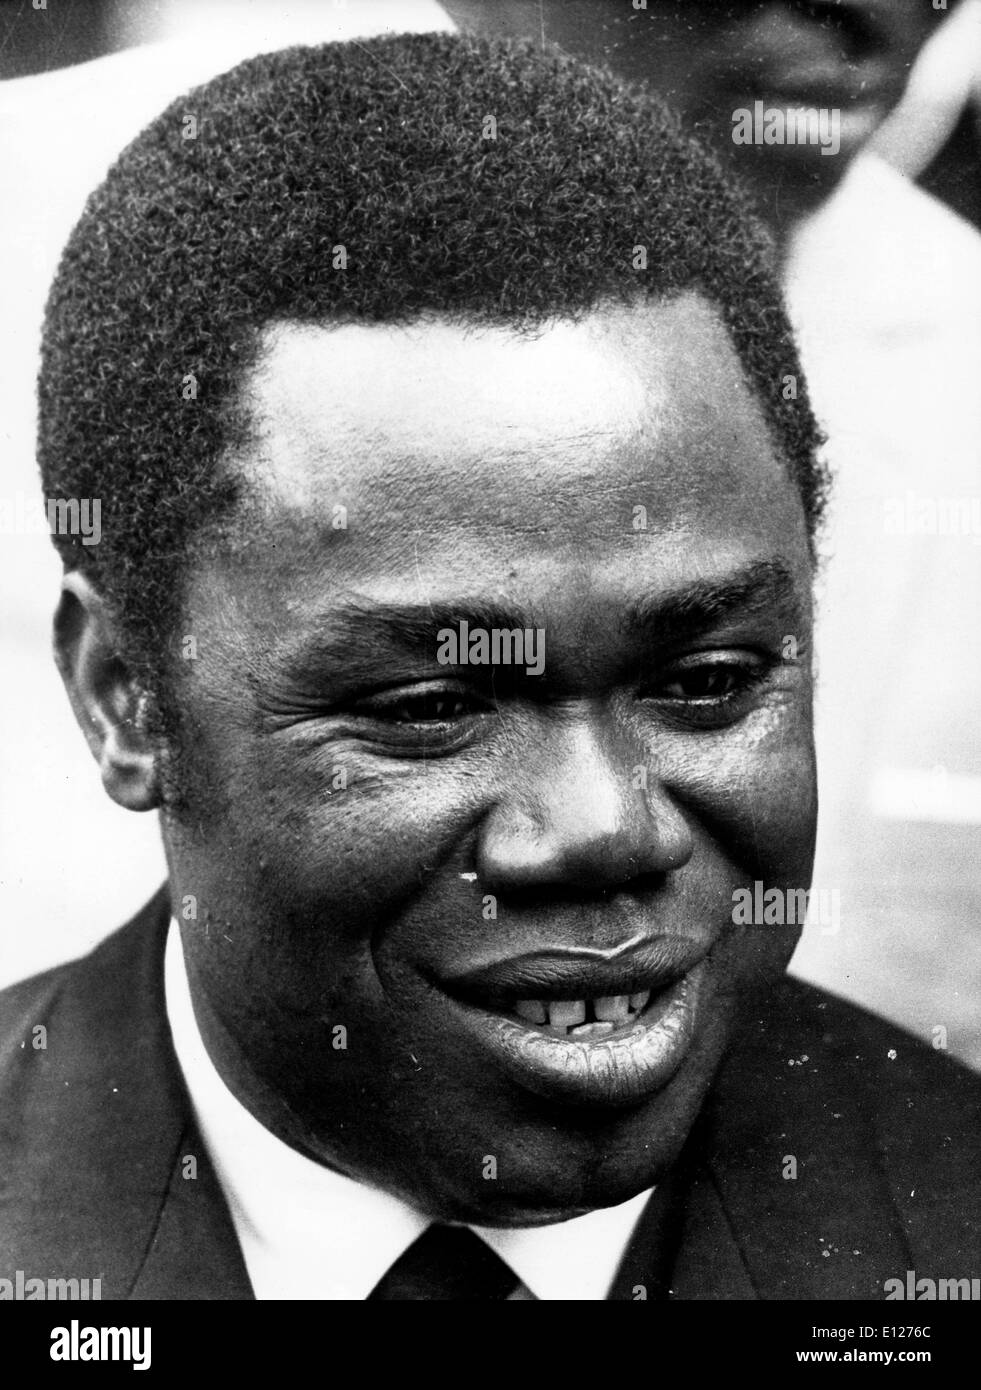 Apr 01, 2009 - London, England, United Kingdom - DAVID DACKO (March 24, 1930 Ð November 20, 2003) was the first President of the Central African Republic (Credit Image: KEYSTONE Pictures USA/ZUMAPRESS.com) Stock Photo